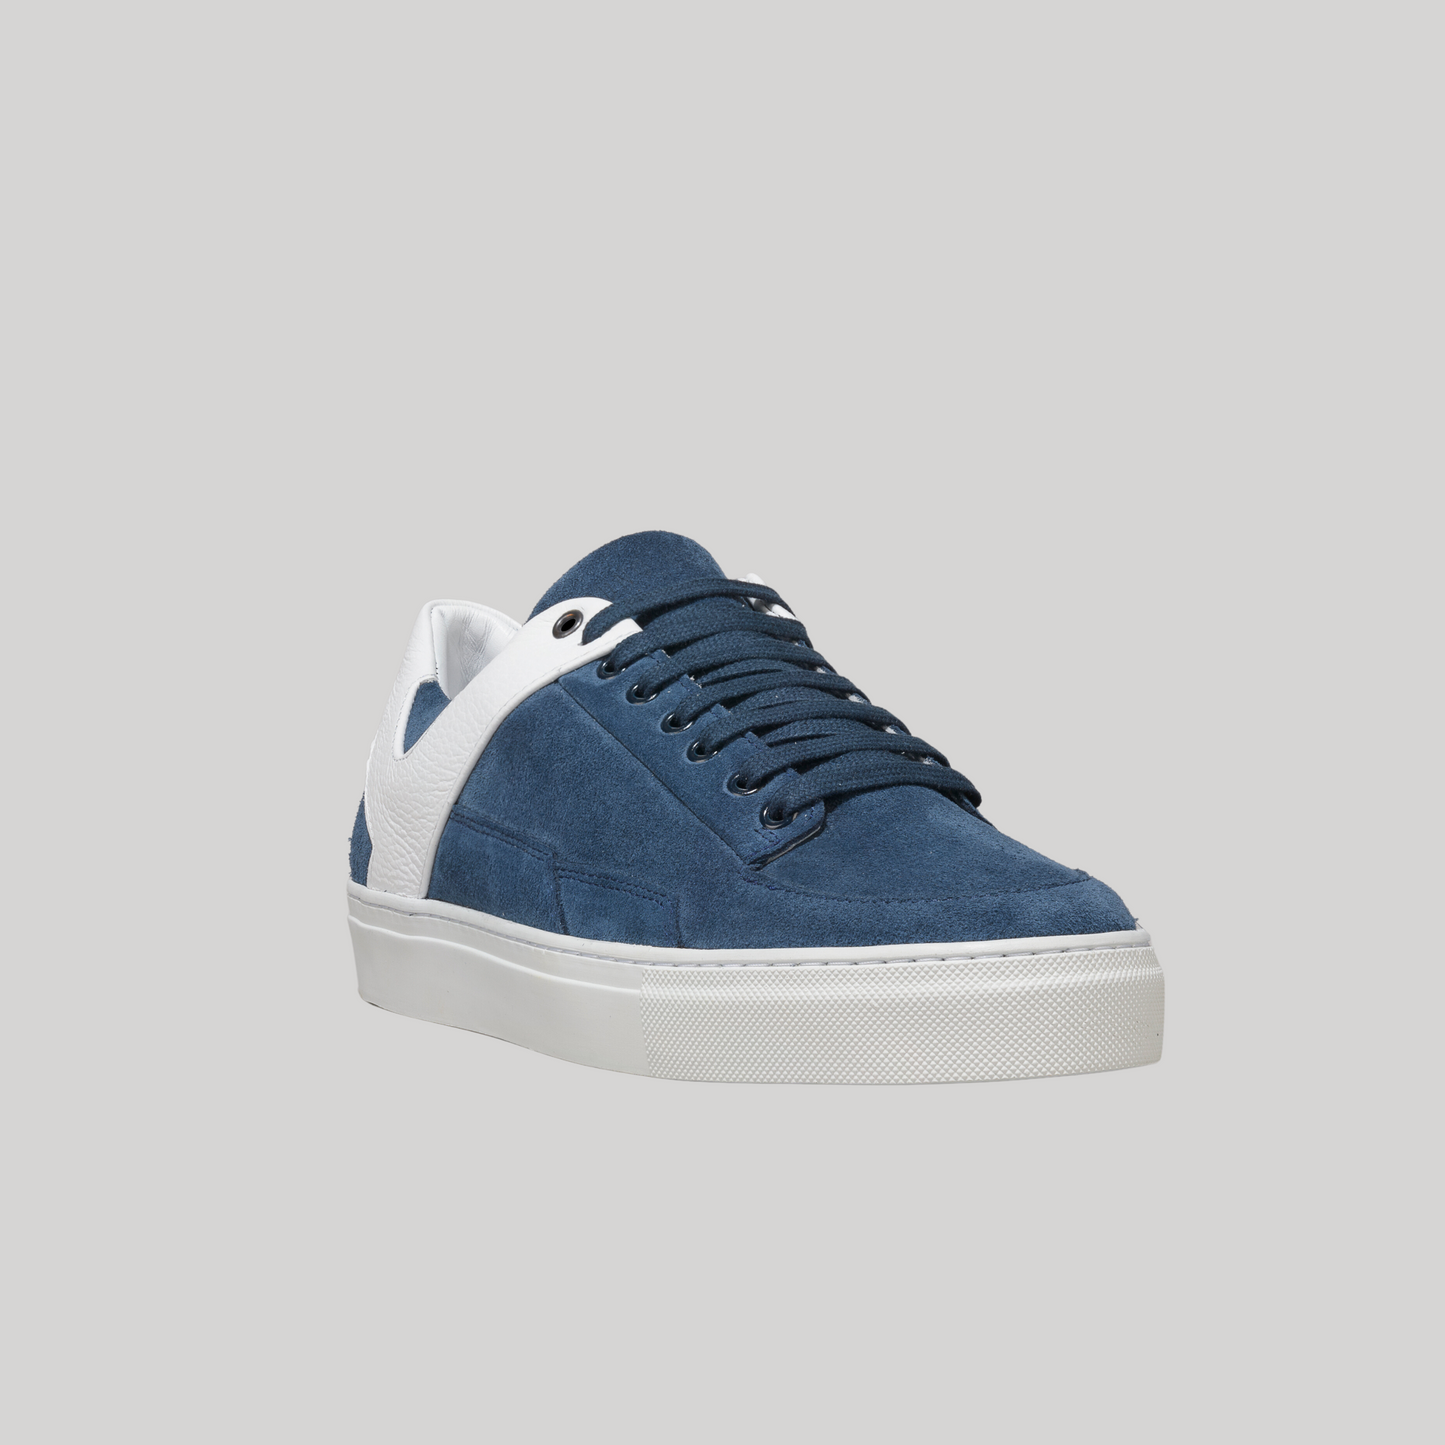 Young Levels - Ocean - Blue Suede Shoe